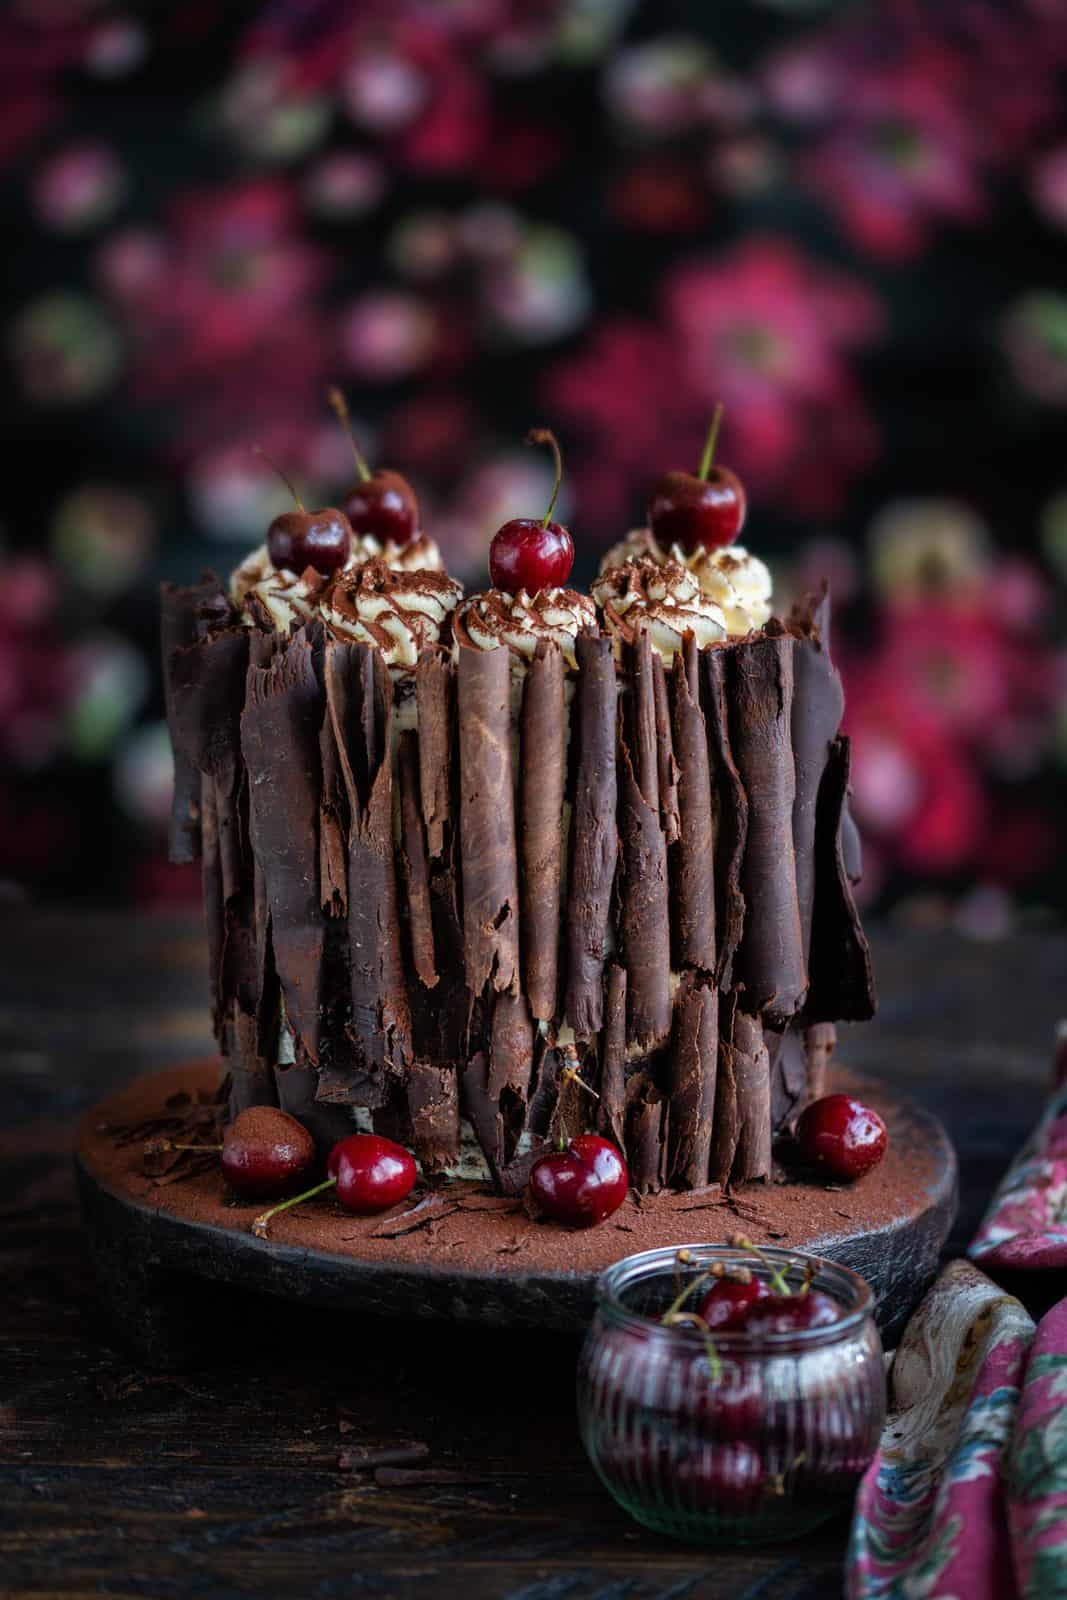 Black Forest Gateau decorated with fresh cherries and chocolate curls